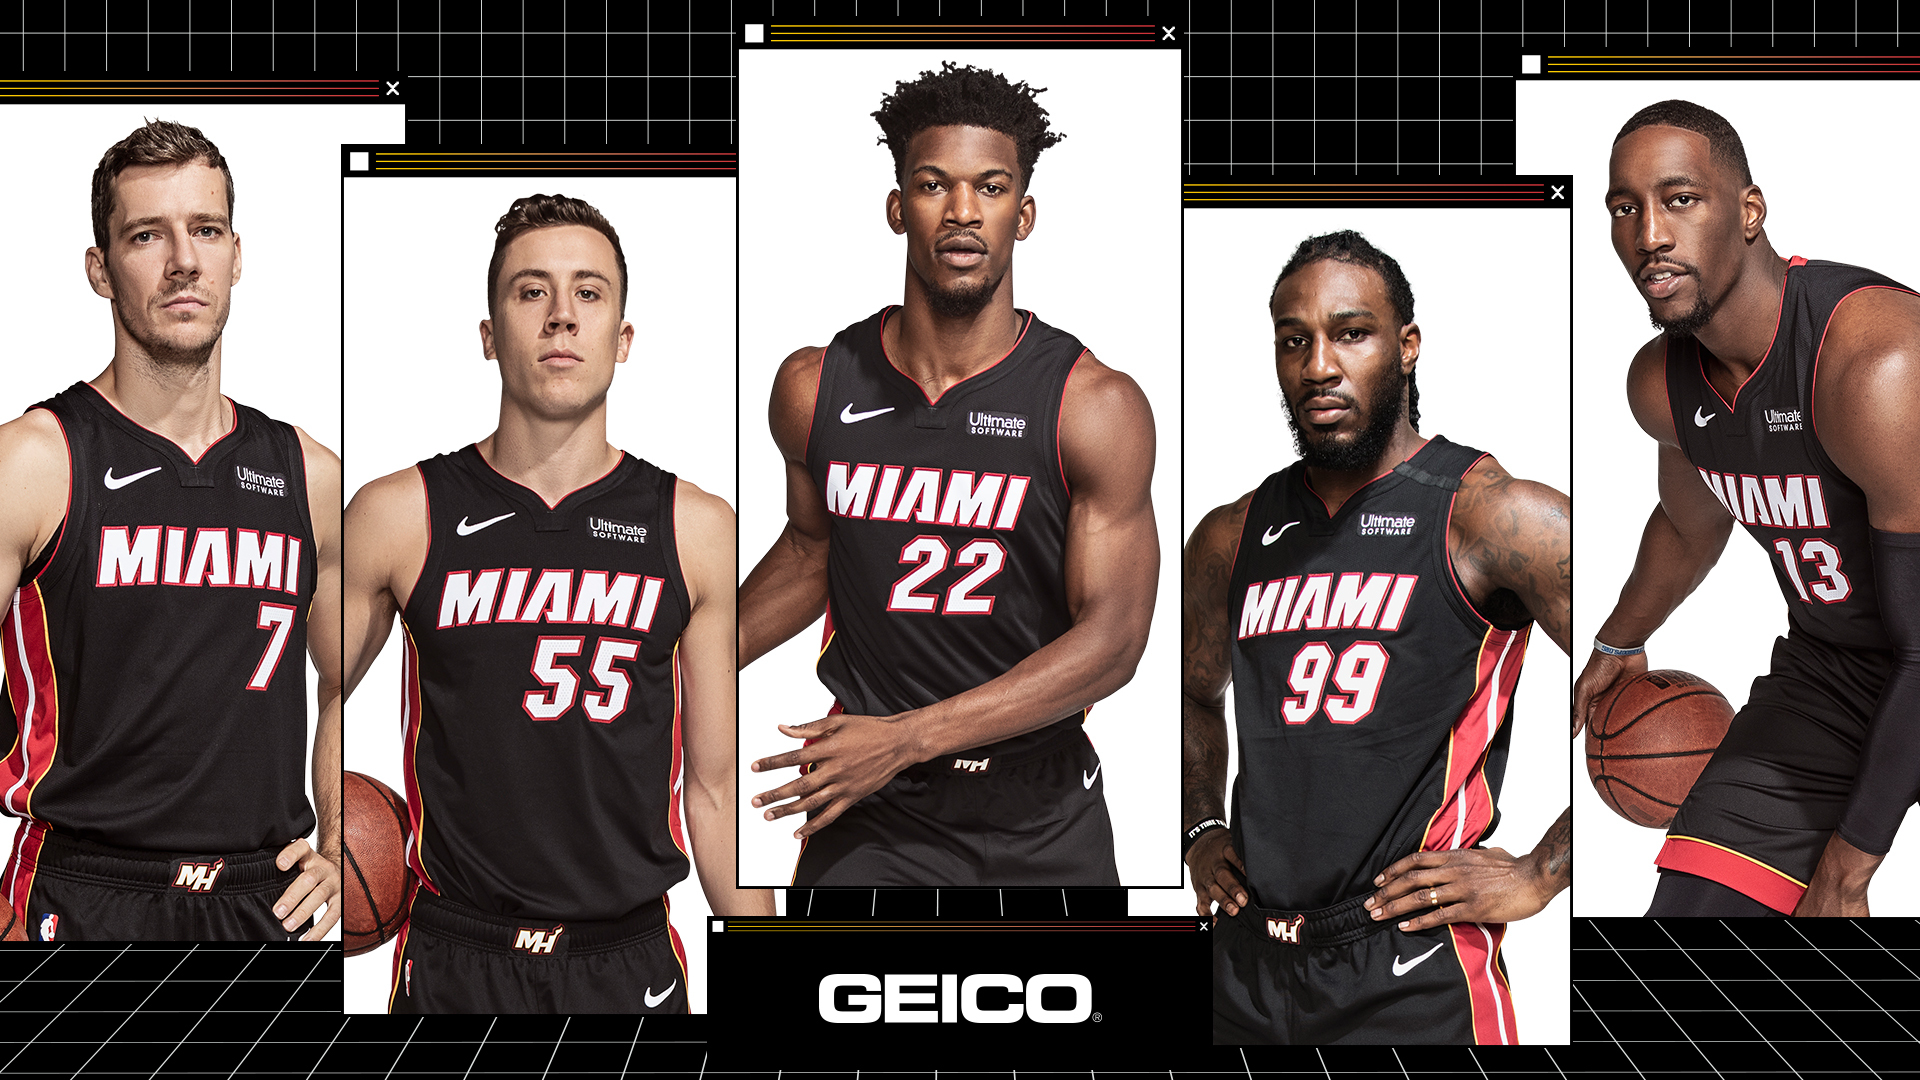 Miami HEAT on X: Your Game 4 starters. INJURY UPDATE: Kelly